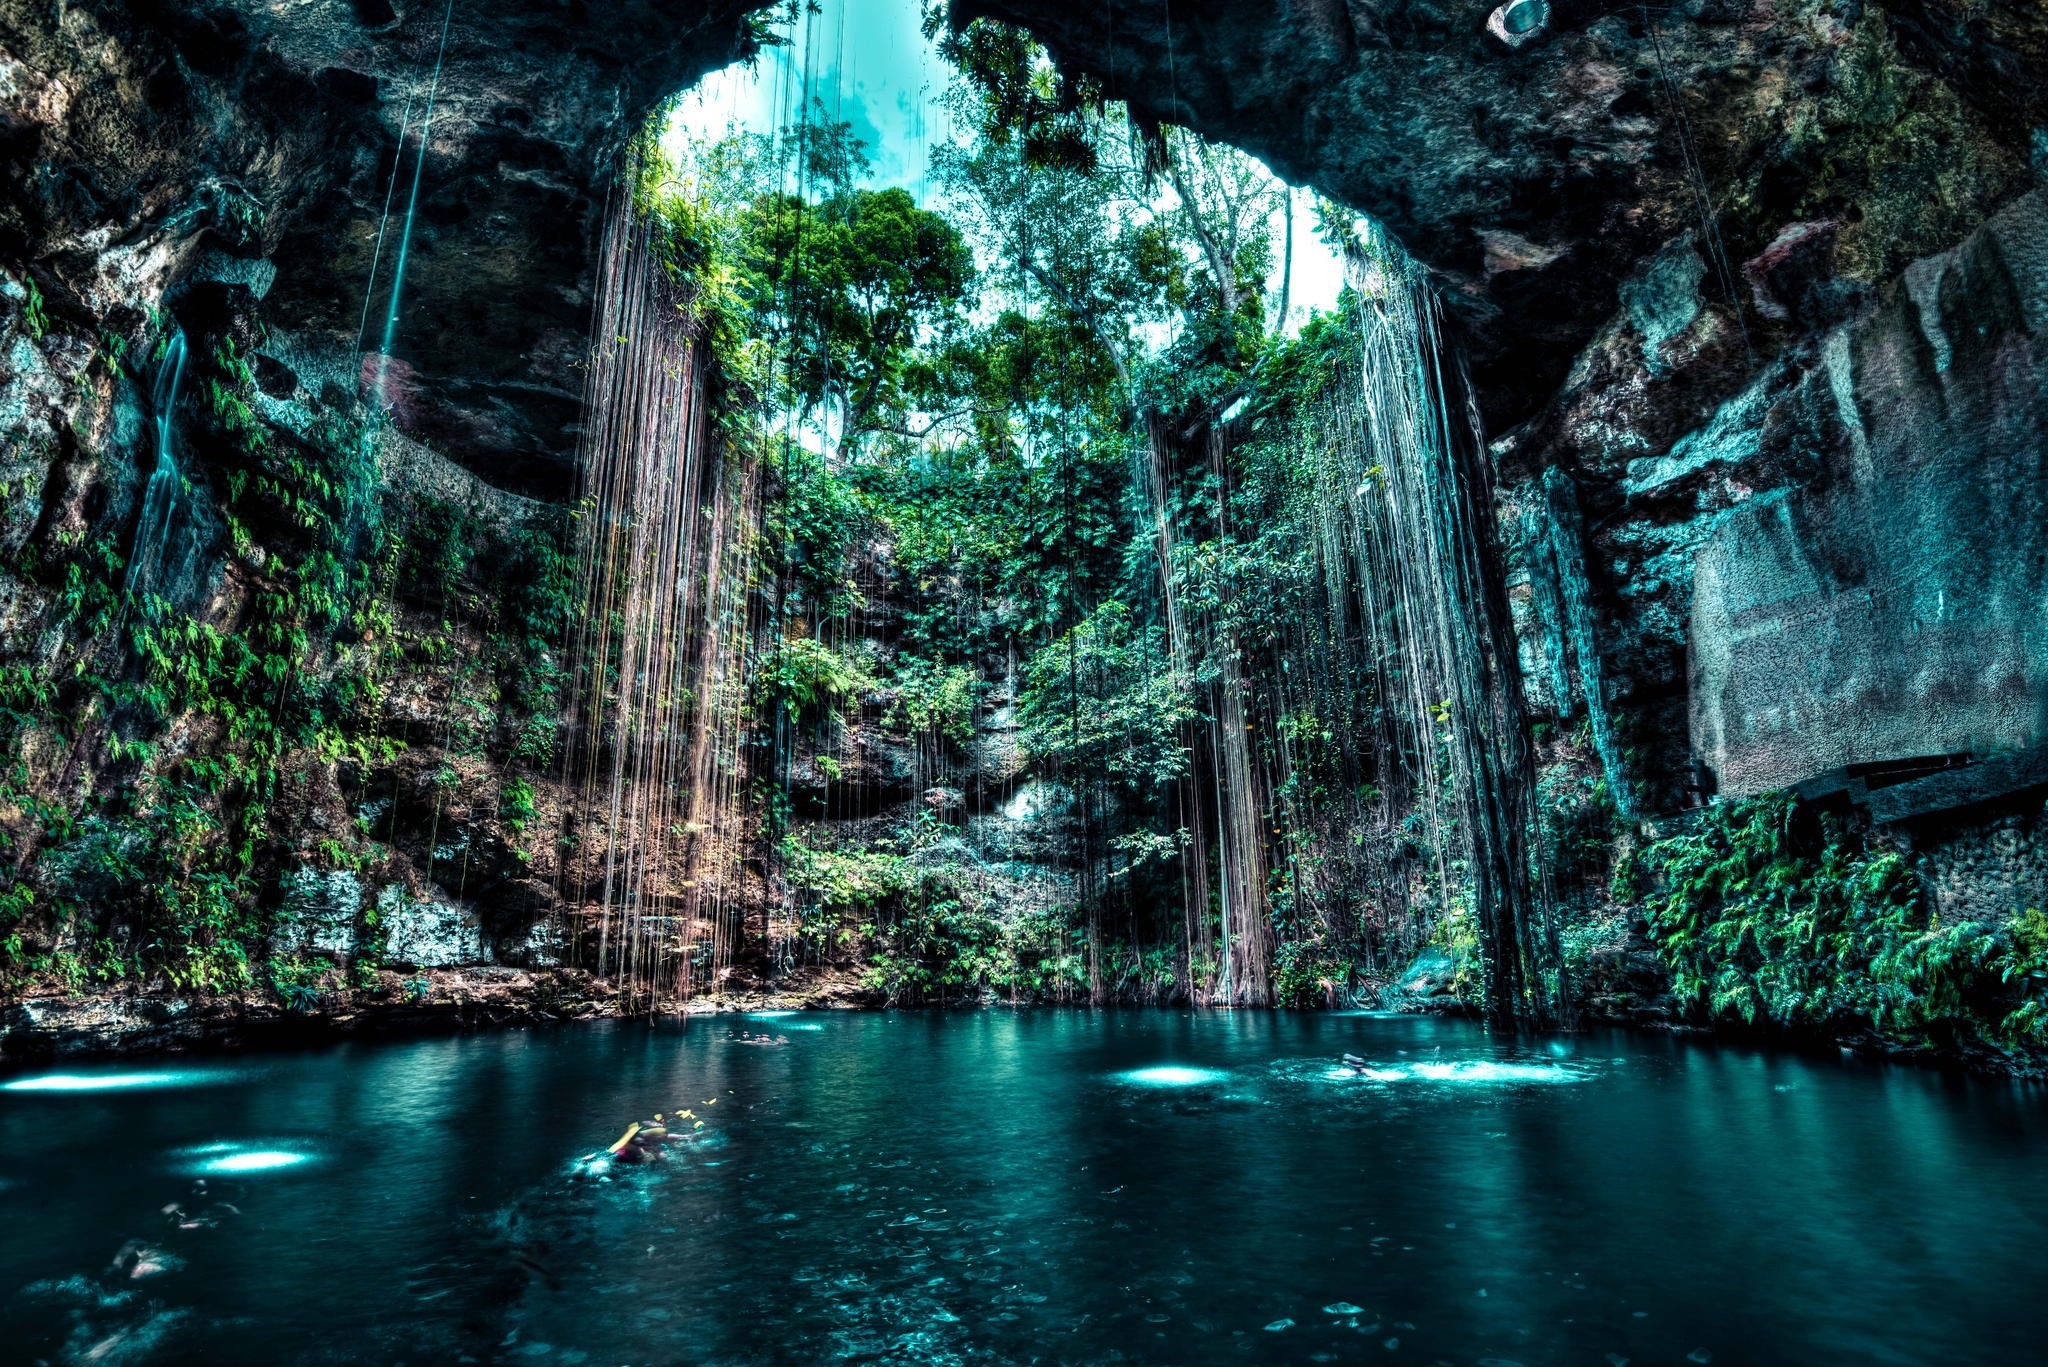 General 2048x1367 nature landscape cenotes cave lake rocks water trees